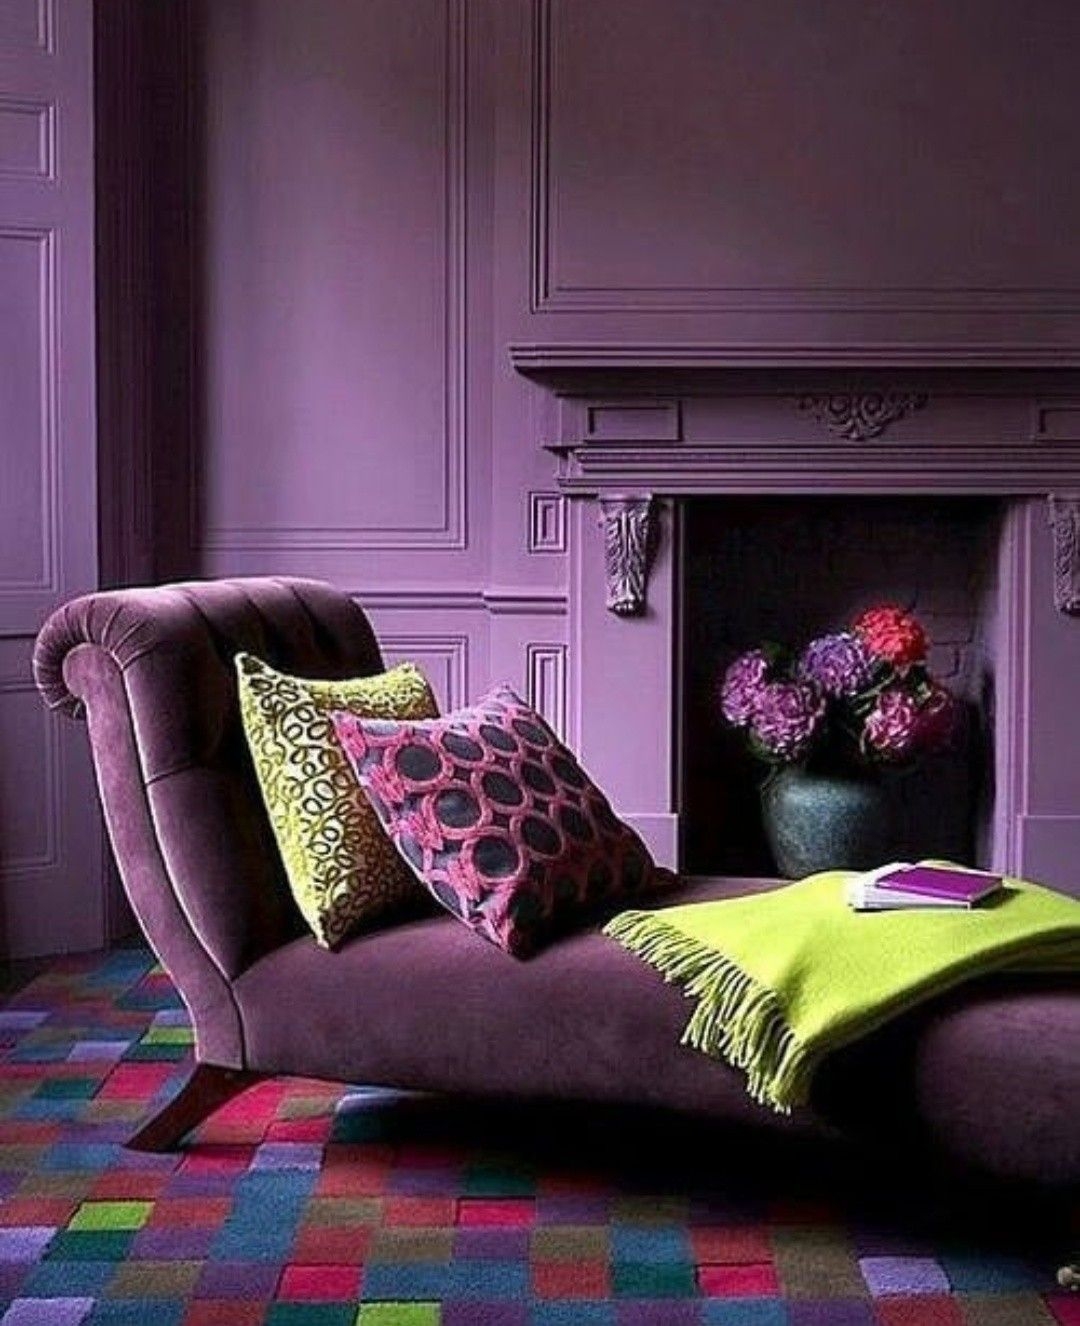 Funky chaise lounge